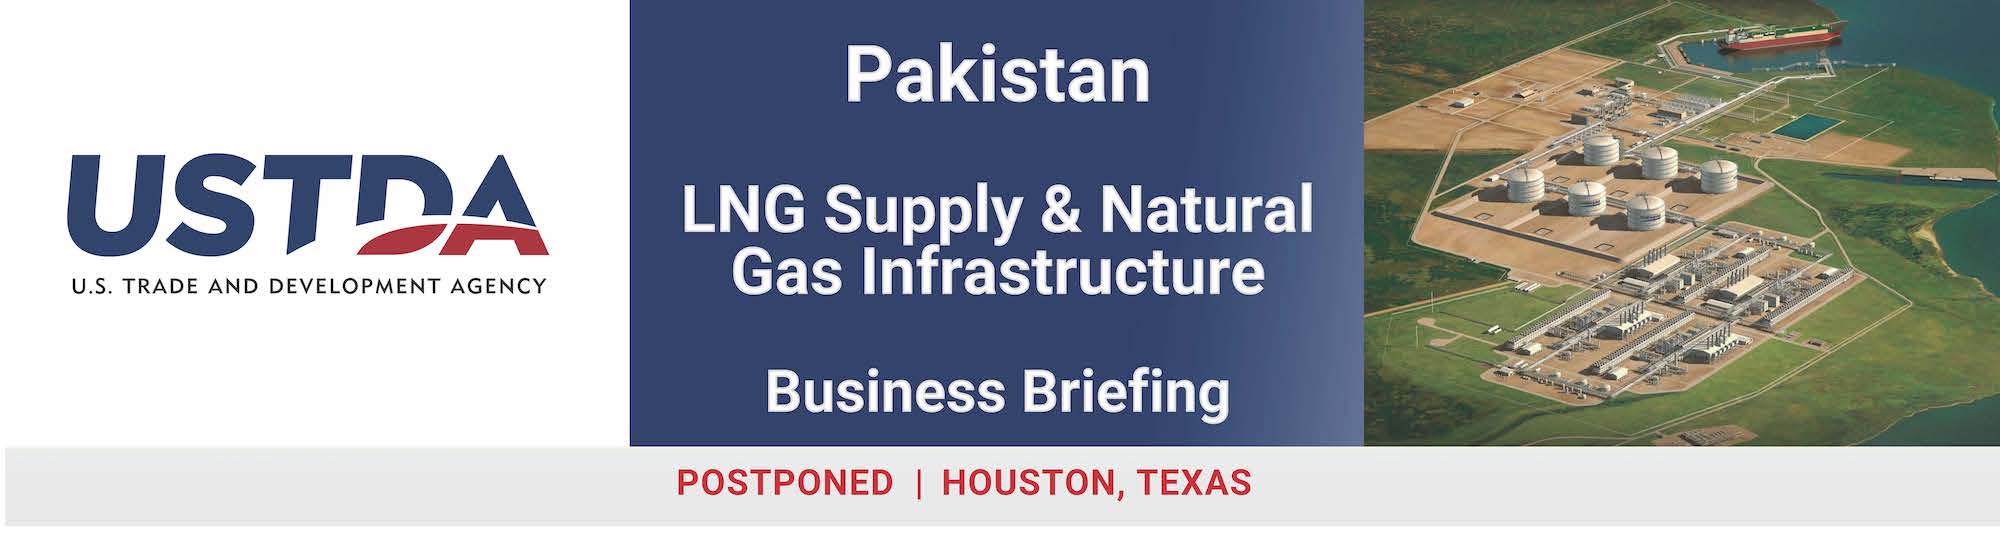 Pakistan LNG Supply and Natural Gas Infrastructure REVERSE TRADE MISSION AND BUSINESS BRIEFING MARCH 1 – 13, 2020 ▪︎ HOUSTON, TEXAS & WASHINGTON, D.C.